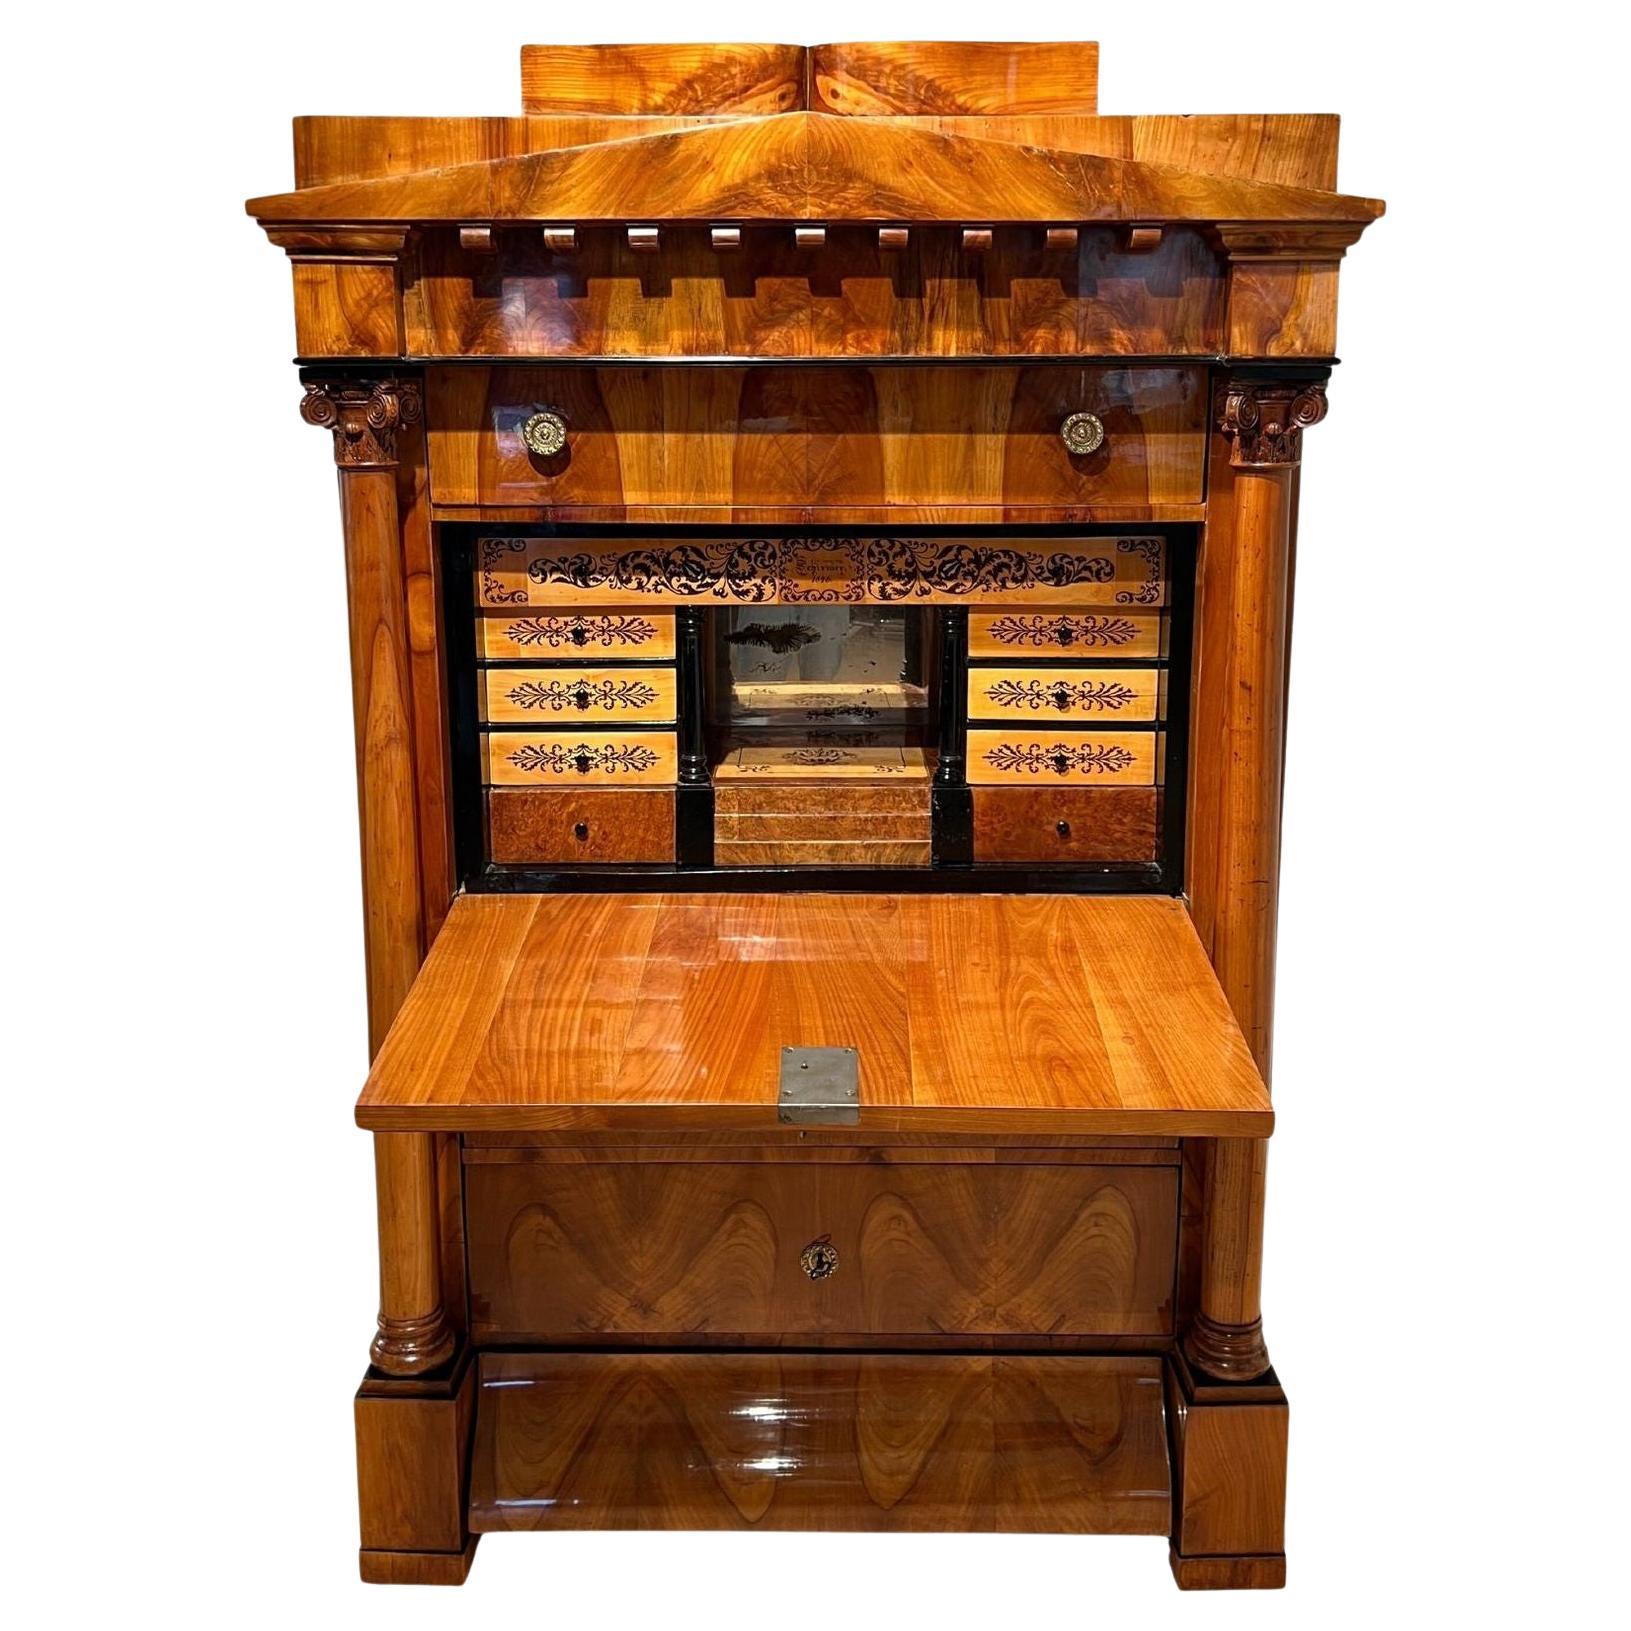 Stately large Biedermeier secretaire from south Germany around 1830.
Cherry veneered on softwood and solid cherry. Solid cherry solid columns with carved Corinthian capitals. Protruding plinth drawer ‚Karnies’ curve and butterfly veneer. Cast brass